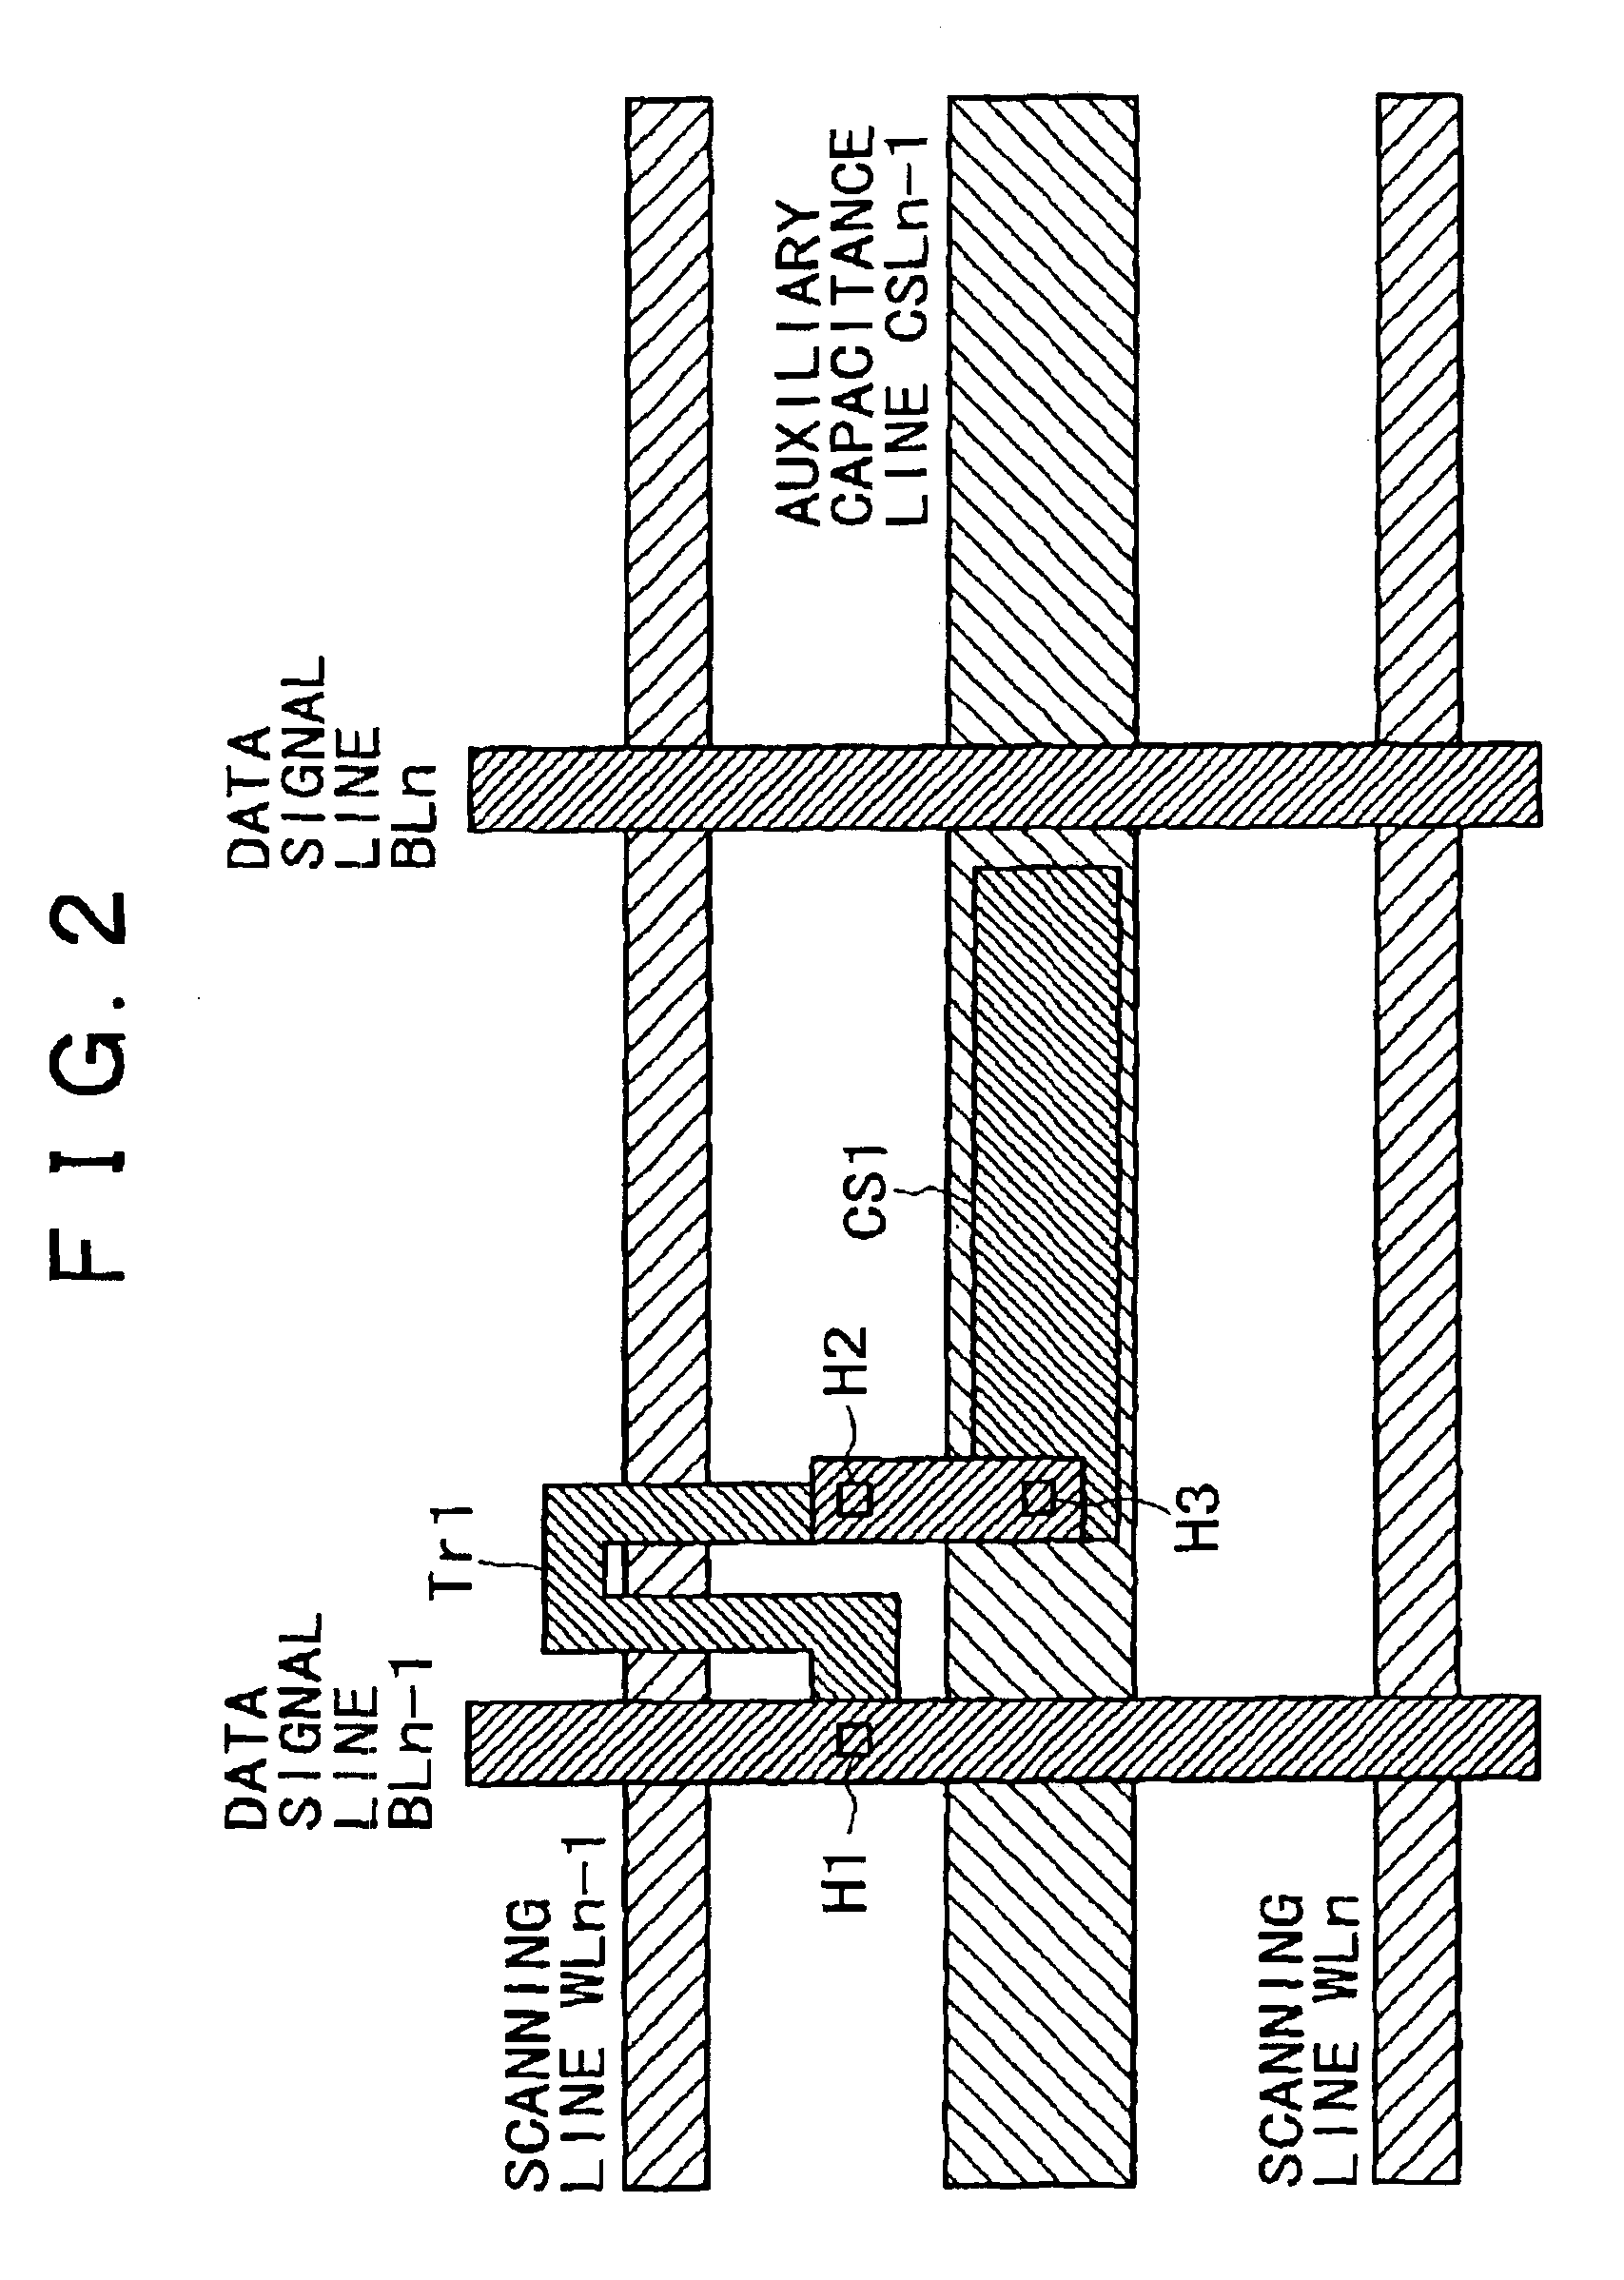 Display pixel having a capacitive electrode with different conductivity type from the switching element